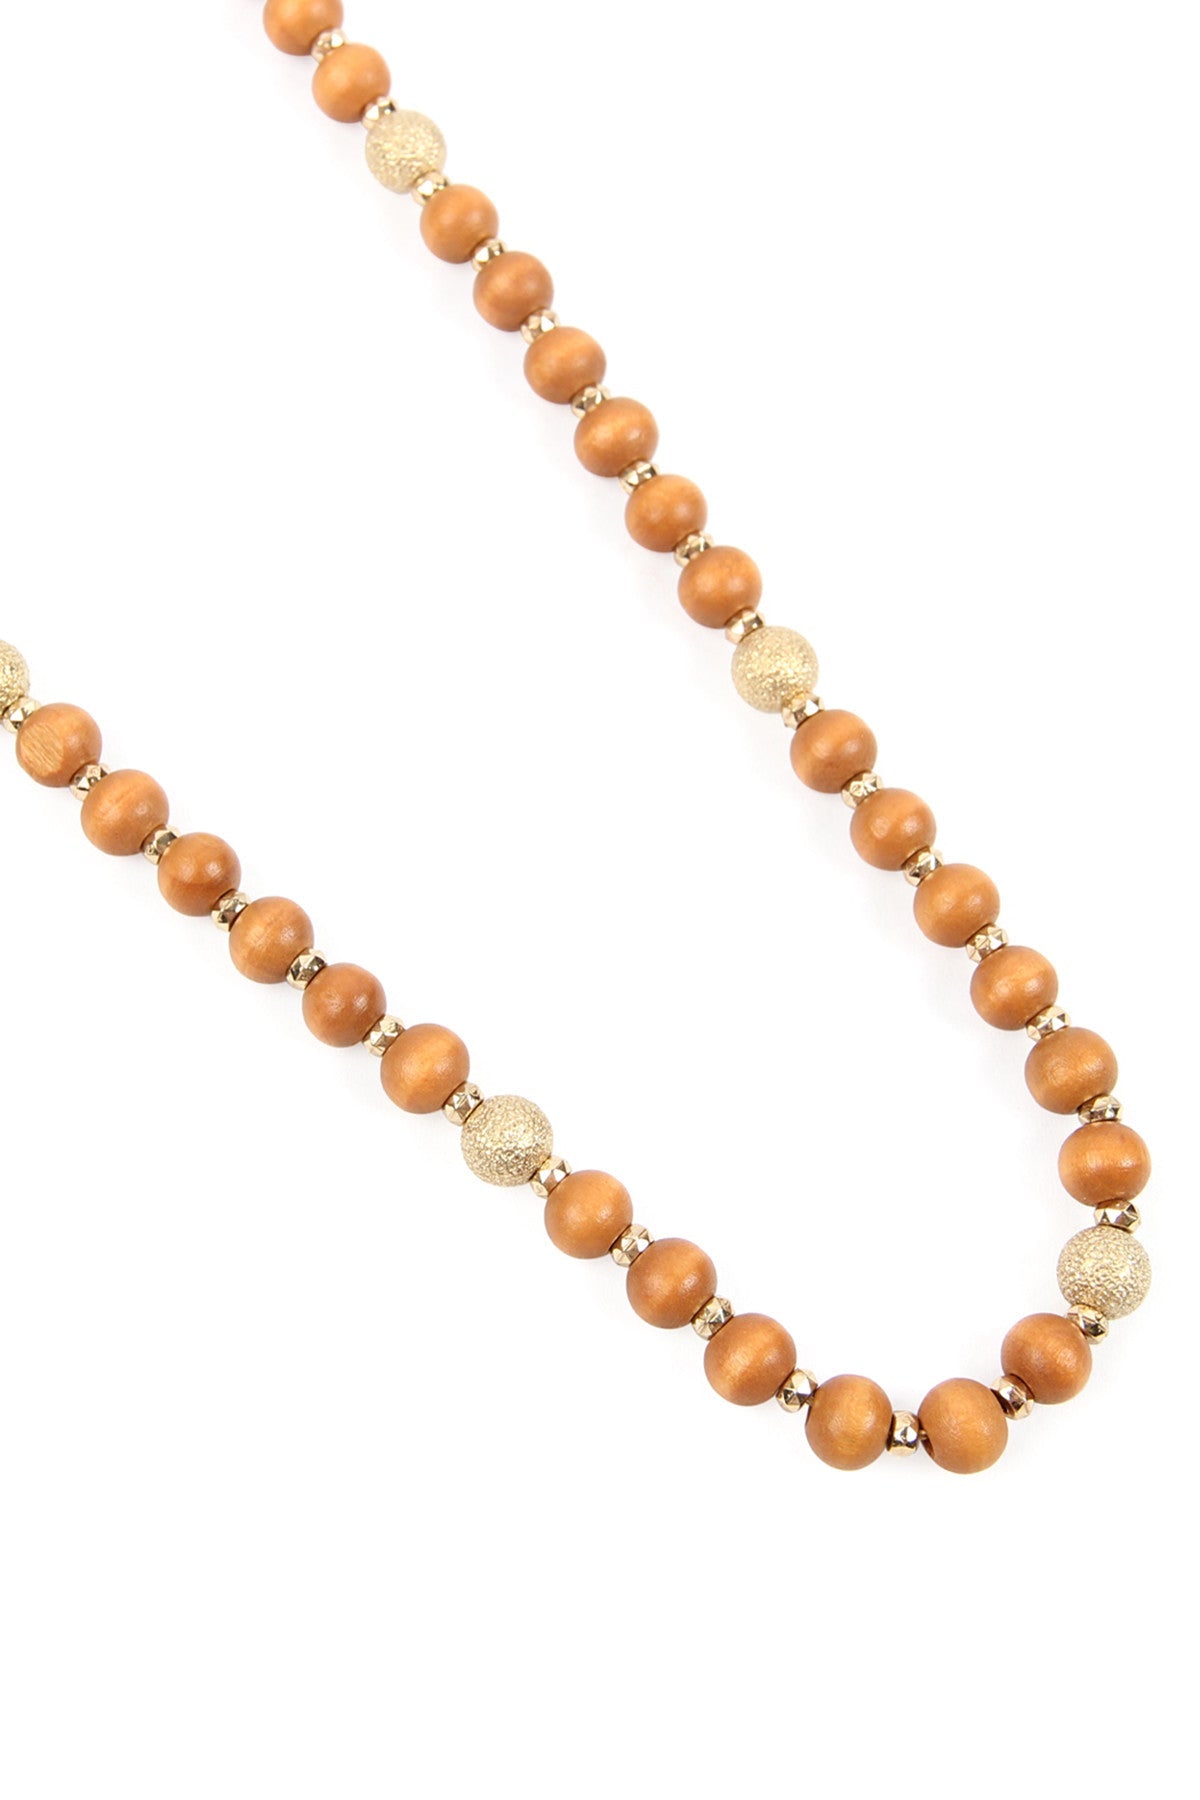 WOOD BEAD NECKLACE (NOW $1.25 ONLY!)